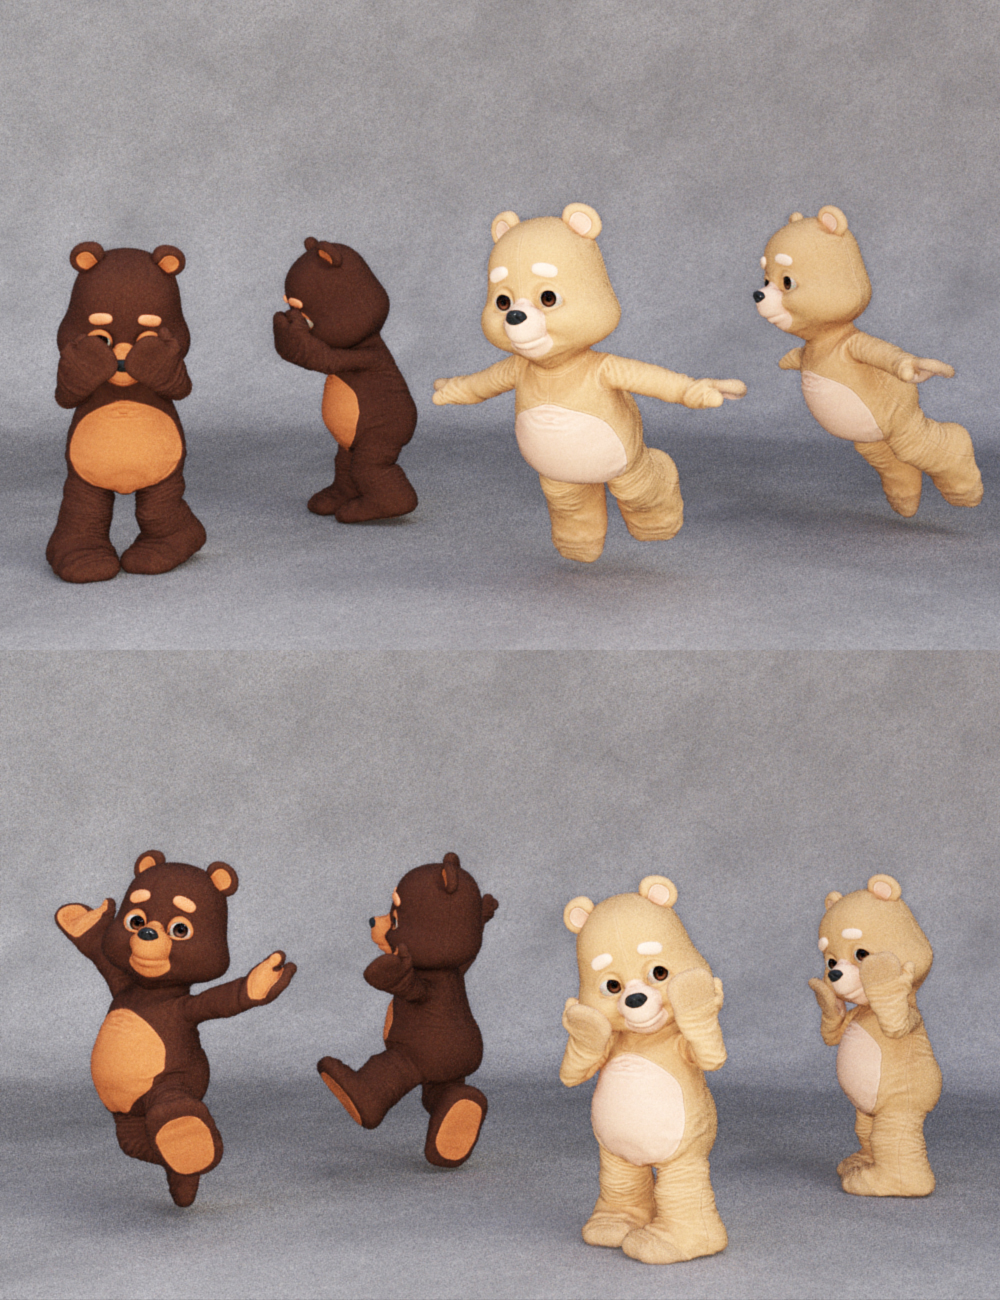 Teddy Care Extra Textures, Poses, and Prop for Teddy by: Muscleman, 3D Models by Daz 3D